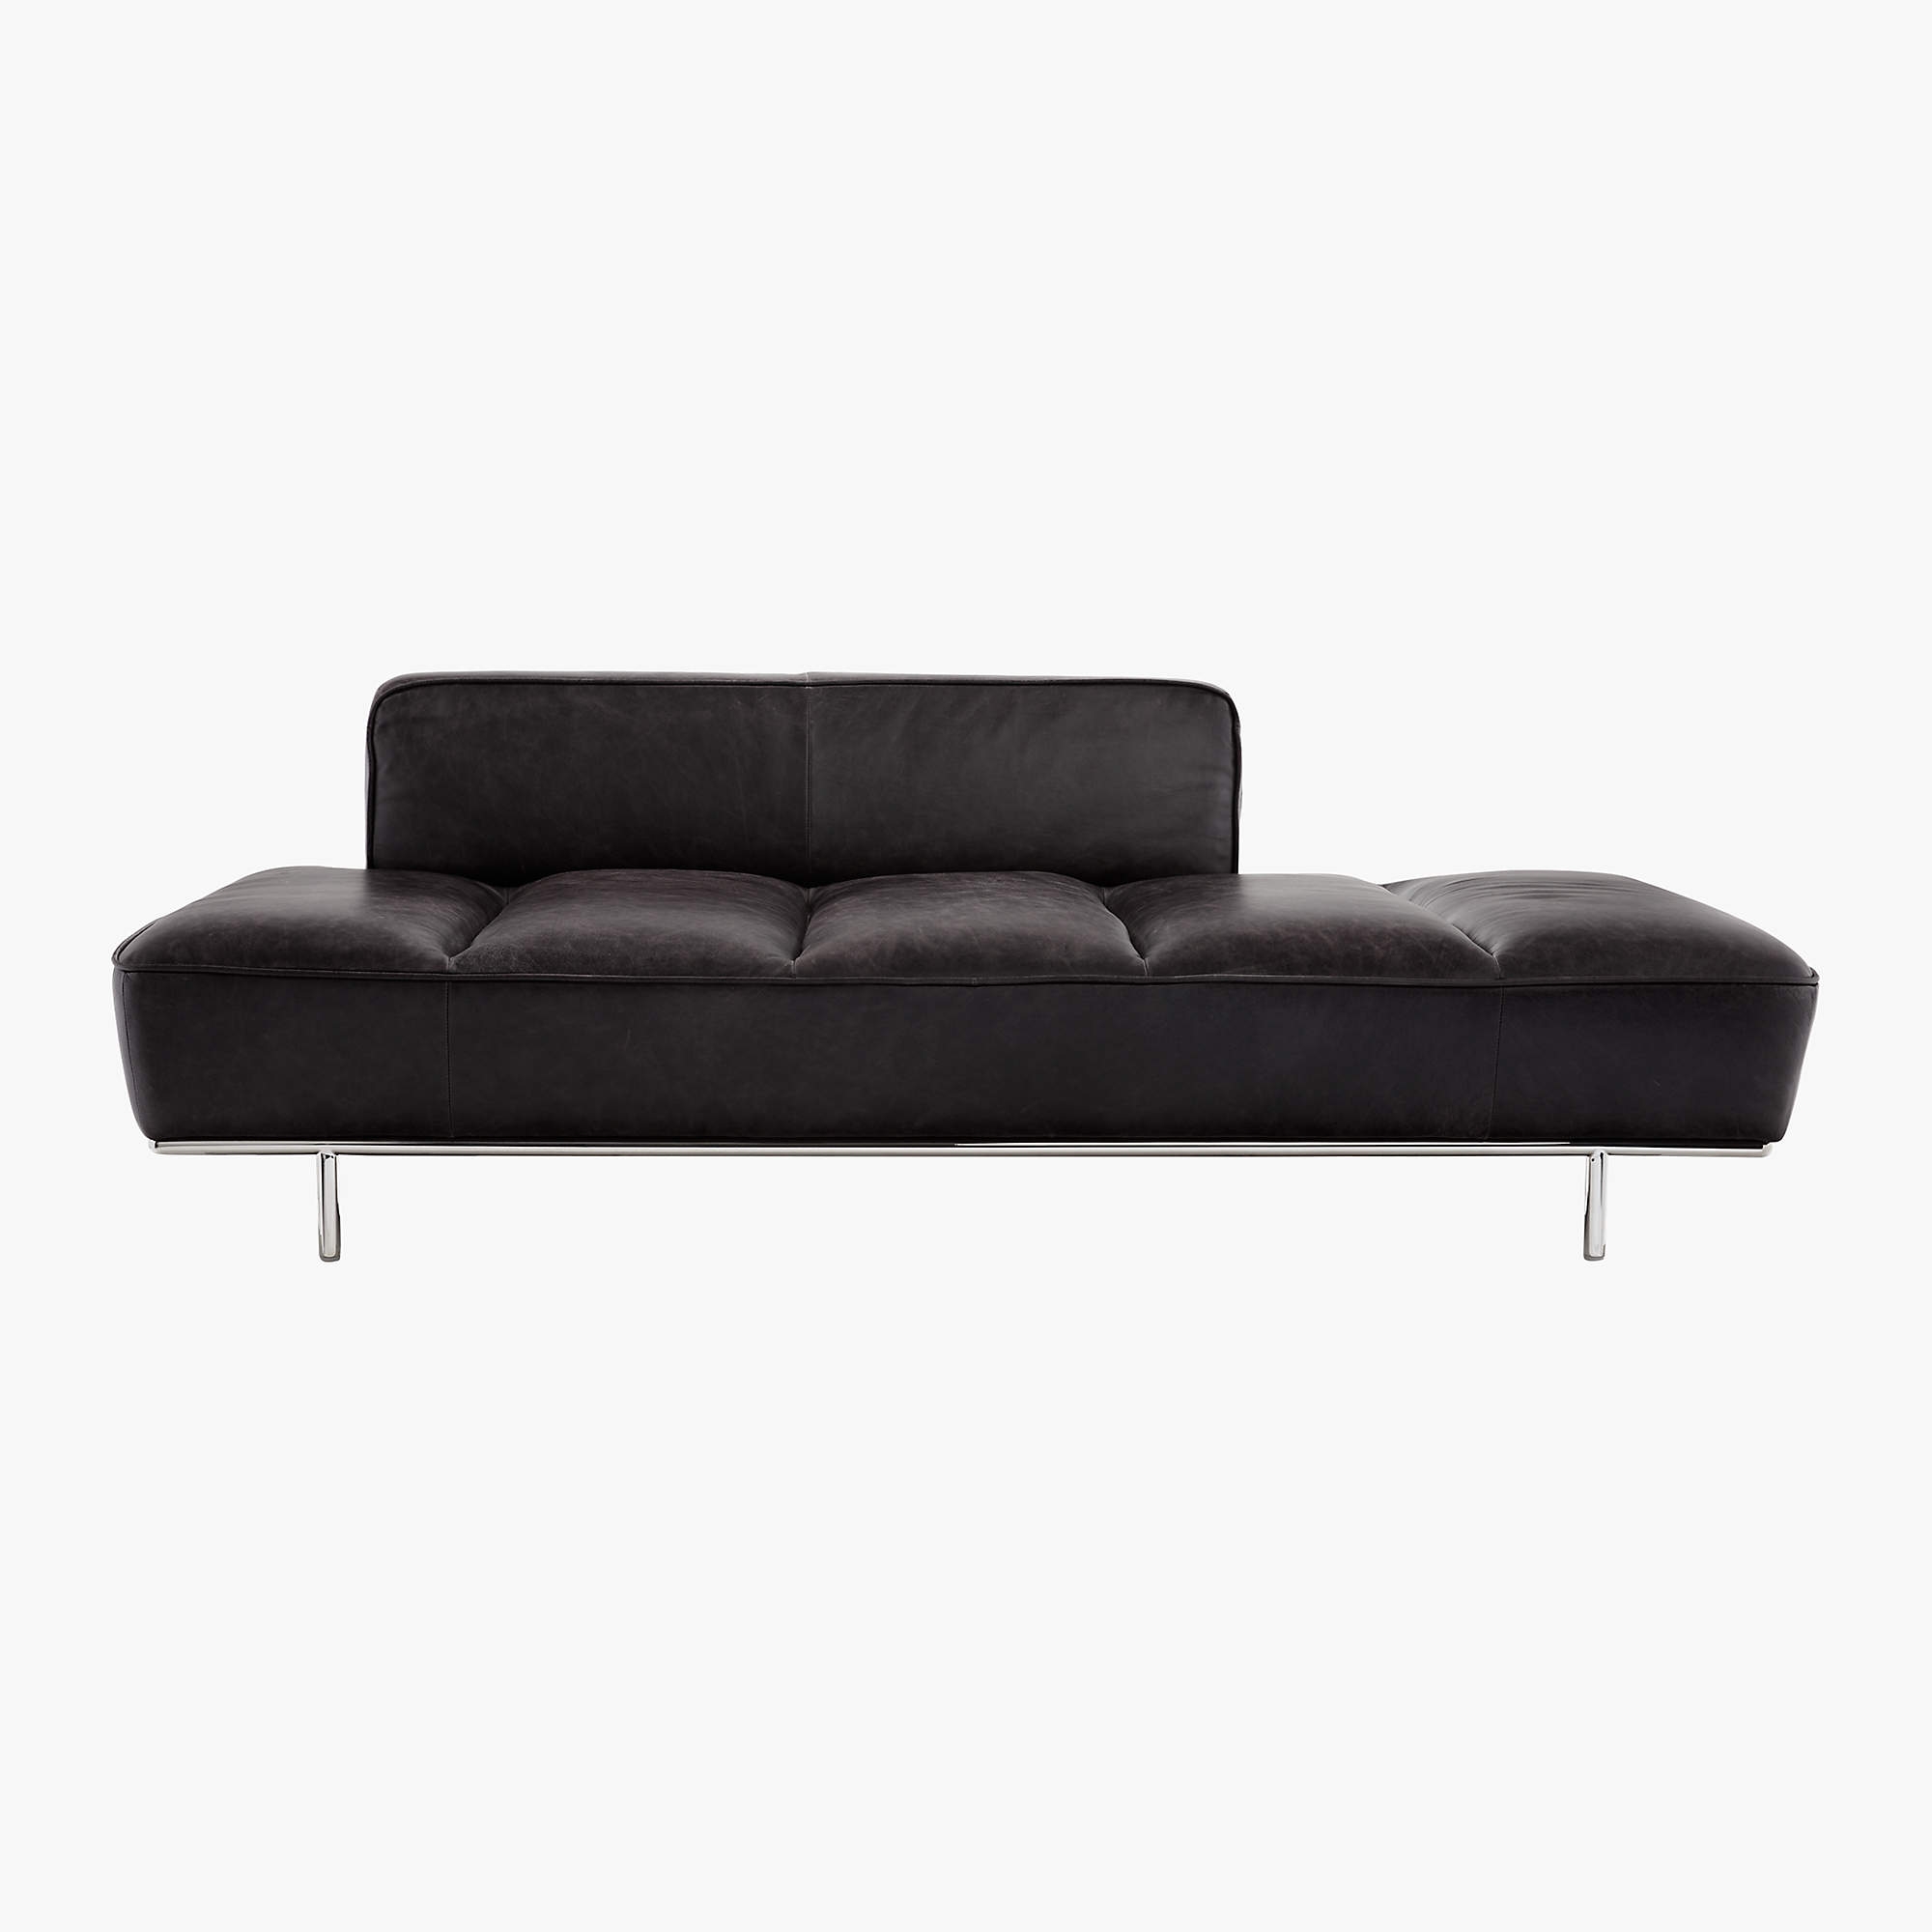 Lawndale Black Leather Daybed with Chrome Base - Image 1